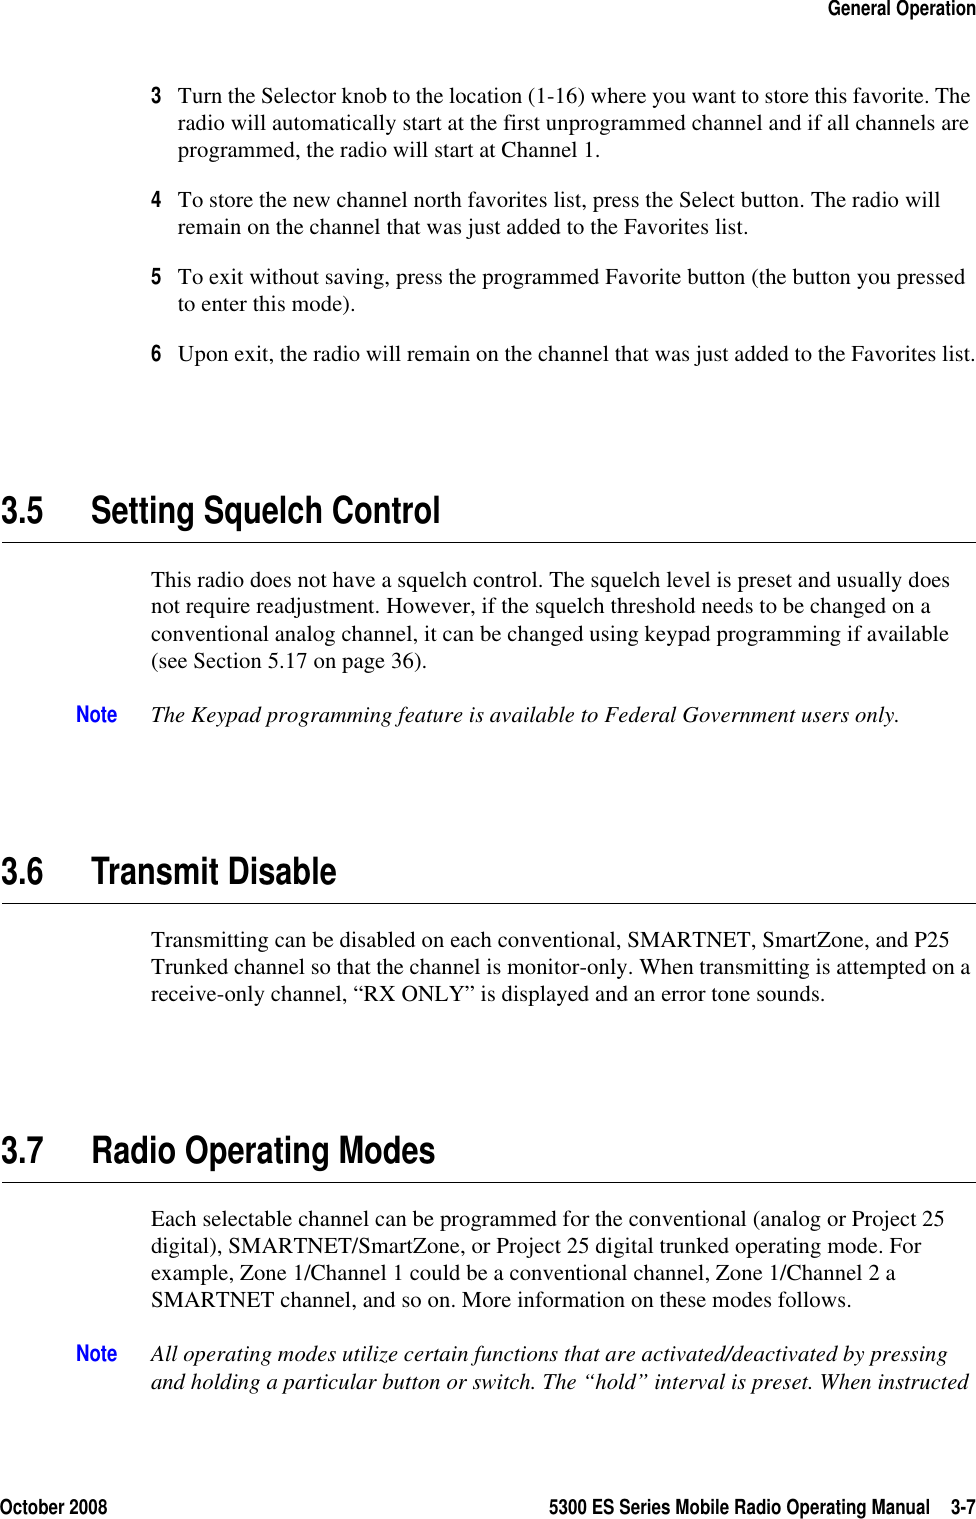 October 2008 5300 ES Series Mobile Radio Operating Manual 3-7General Operation3Turn the Selector knob to the location (1-16) where you want to store this favorite. The radio will automatically start at the first unprogrammed channel and if all channels are programmed, the radio will start at Channel 1.4To store the new channel north favorites list, press the Select button. The radio will remain on the channel that was just added to the Favorites list.5To exit without saving, press the programmed Favorite button (the button you pressed to enter this mode).6Upon exit, the radio will remain on the channel that was just added to the Favorites list.3.5 Setting Squelch ControlThis radio does not have a squelch control. The squelch level is preset and usually does not require readjustment. However, if the squelch threshold needs to be changed on a conventional analog channel, it can be changed using keypad programming if available (see Section 5.17 on page 36).Note The Keypad programming feature is available to Federal Government users only.3.6 Transmit DisableTransmitting can be disabled on each conventional, SMARTNET, SmartZone, and P25 Trunked channel so that the channel is monitor-only. When transmitting is attempted on a receive-only channel, “RX ONLY” is displayed and an error tone sounds.3.7 Radio Operating ModesEach selectable channel can be programmed for the conventional (analog or Project 25 digital), SMARTNET/SmartZone, or Project 25 digital trunked operating mode. For example, Zone 1/Channel 1 could be a conventional channel, Zone 1/Channel 2 a SMARTNET channel, and so on. More information on these modes follows.Note All operating modes utilize certain functions that are activated/deactivated by pressing and holding a particular button or switch. The “hold” interval is preset. When instructed 